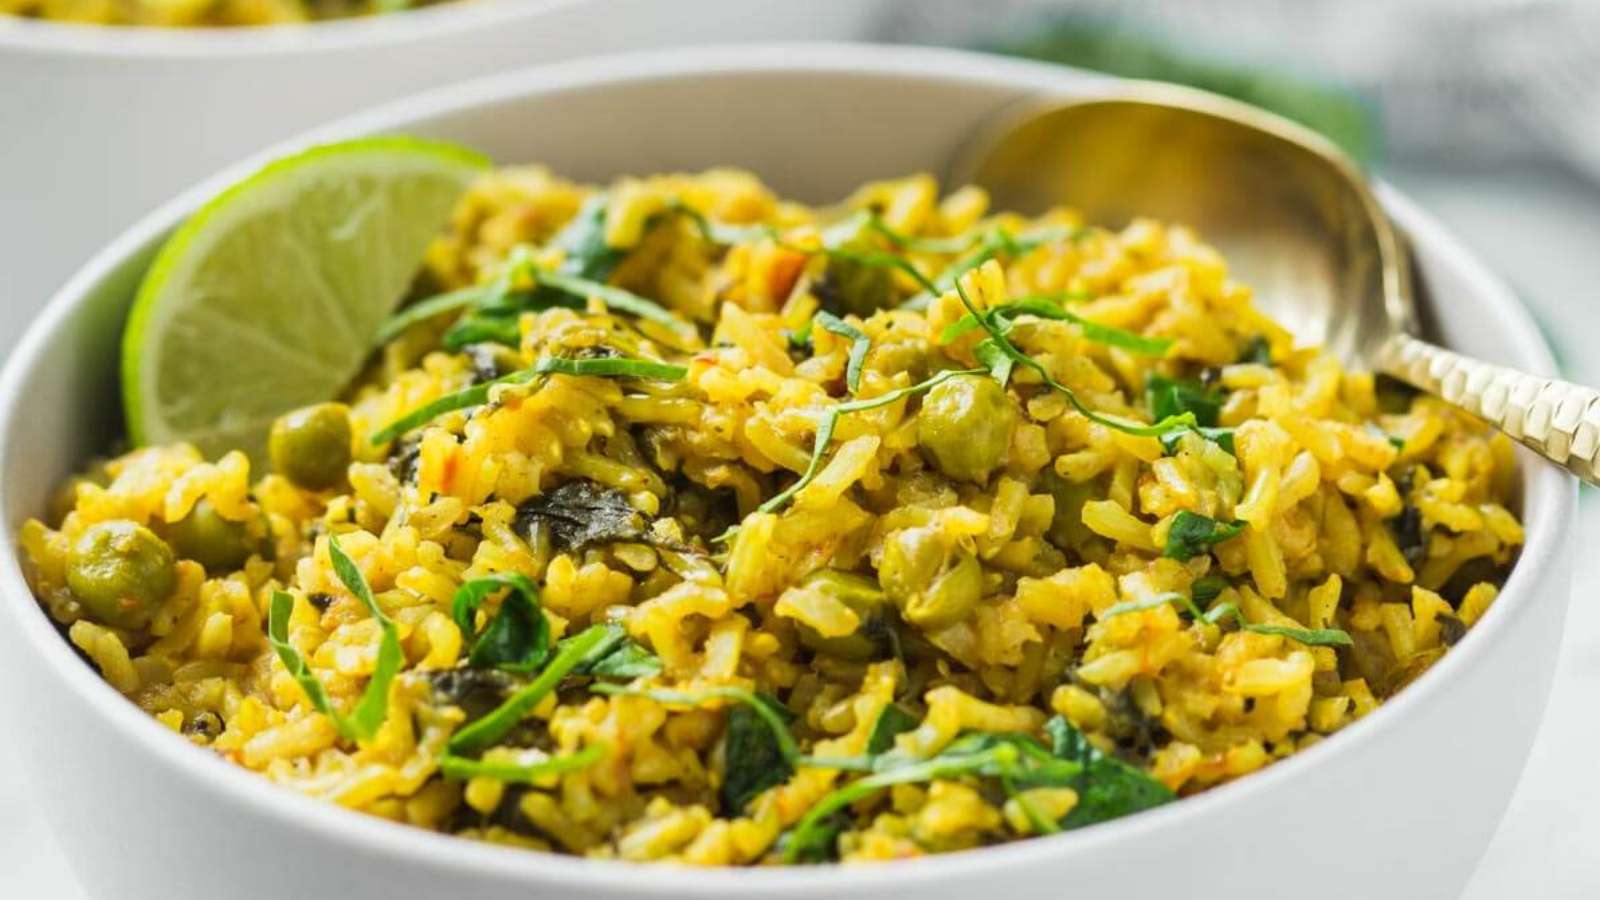 A bowl of yellow rice with peas and spinach.